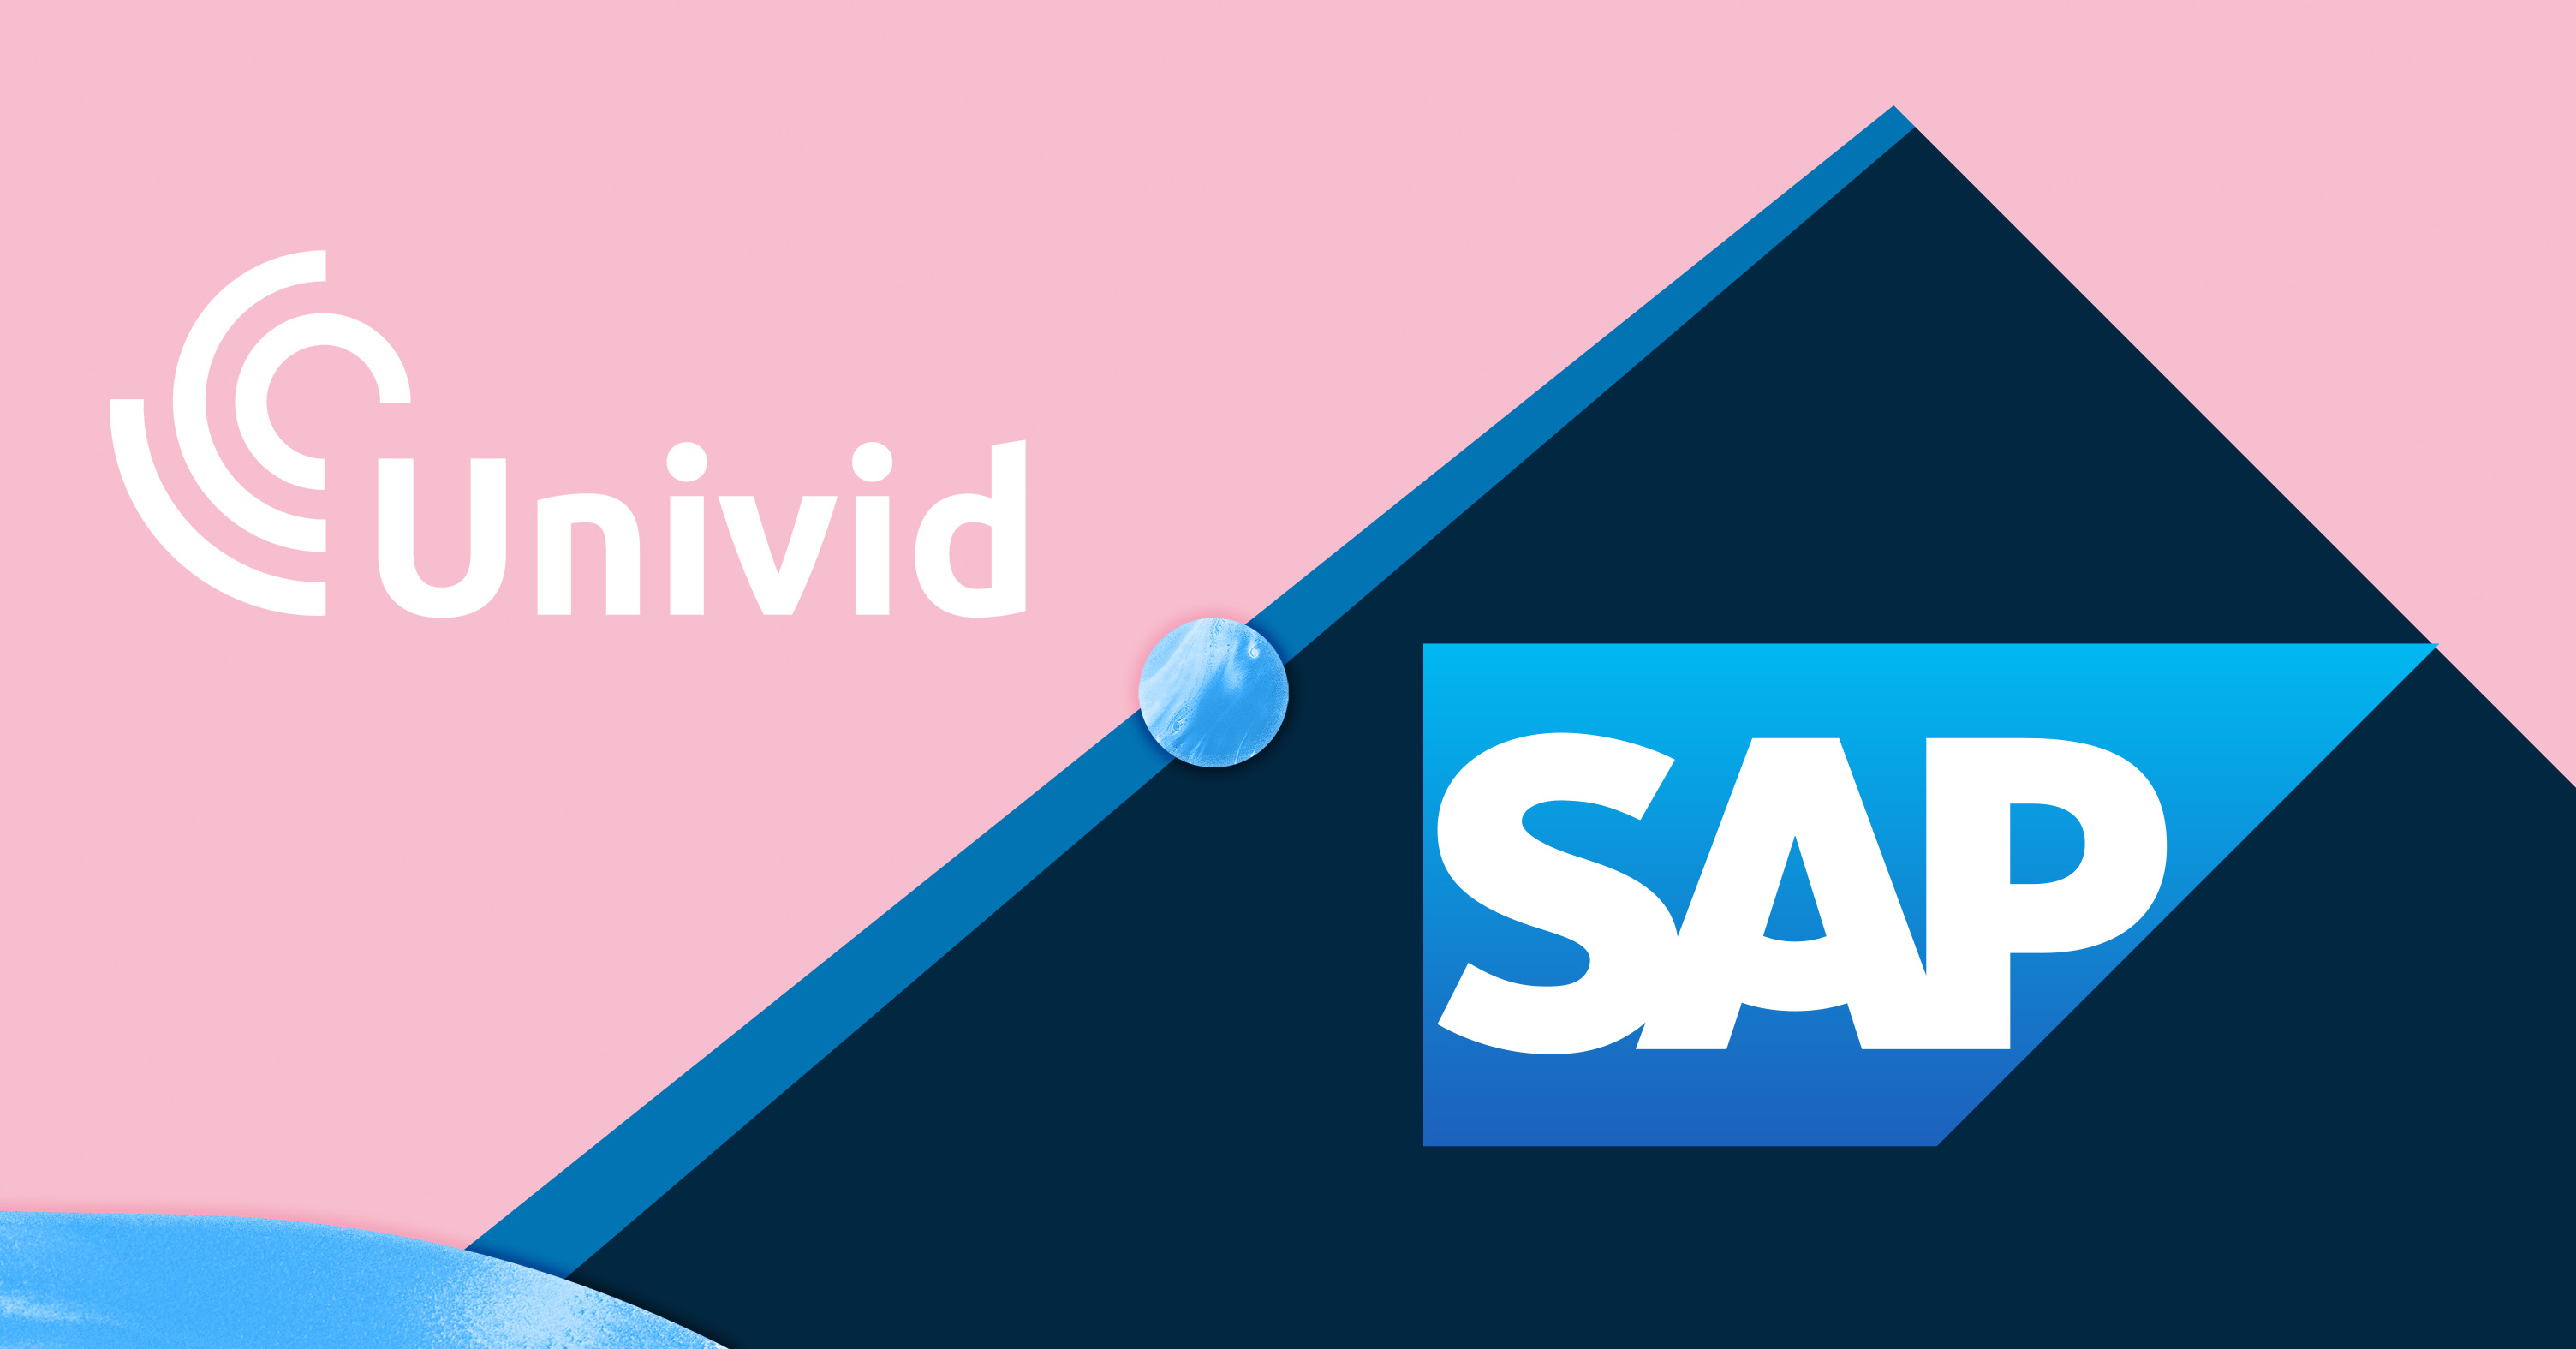 The SAP webinar integration allows you as a marketer to register attendees from SAP Marketing Cloud to your webinars in Univid, while getting back insights like who attended and not. Finally, a modern webinar tool that connects to SAP.